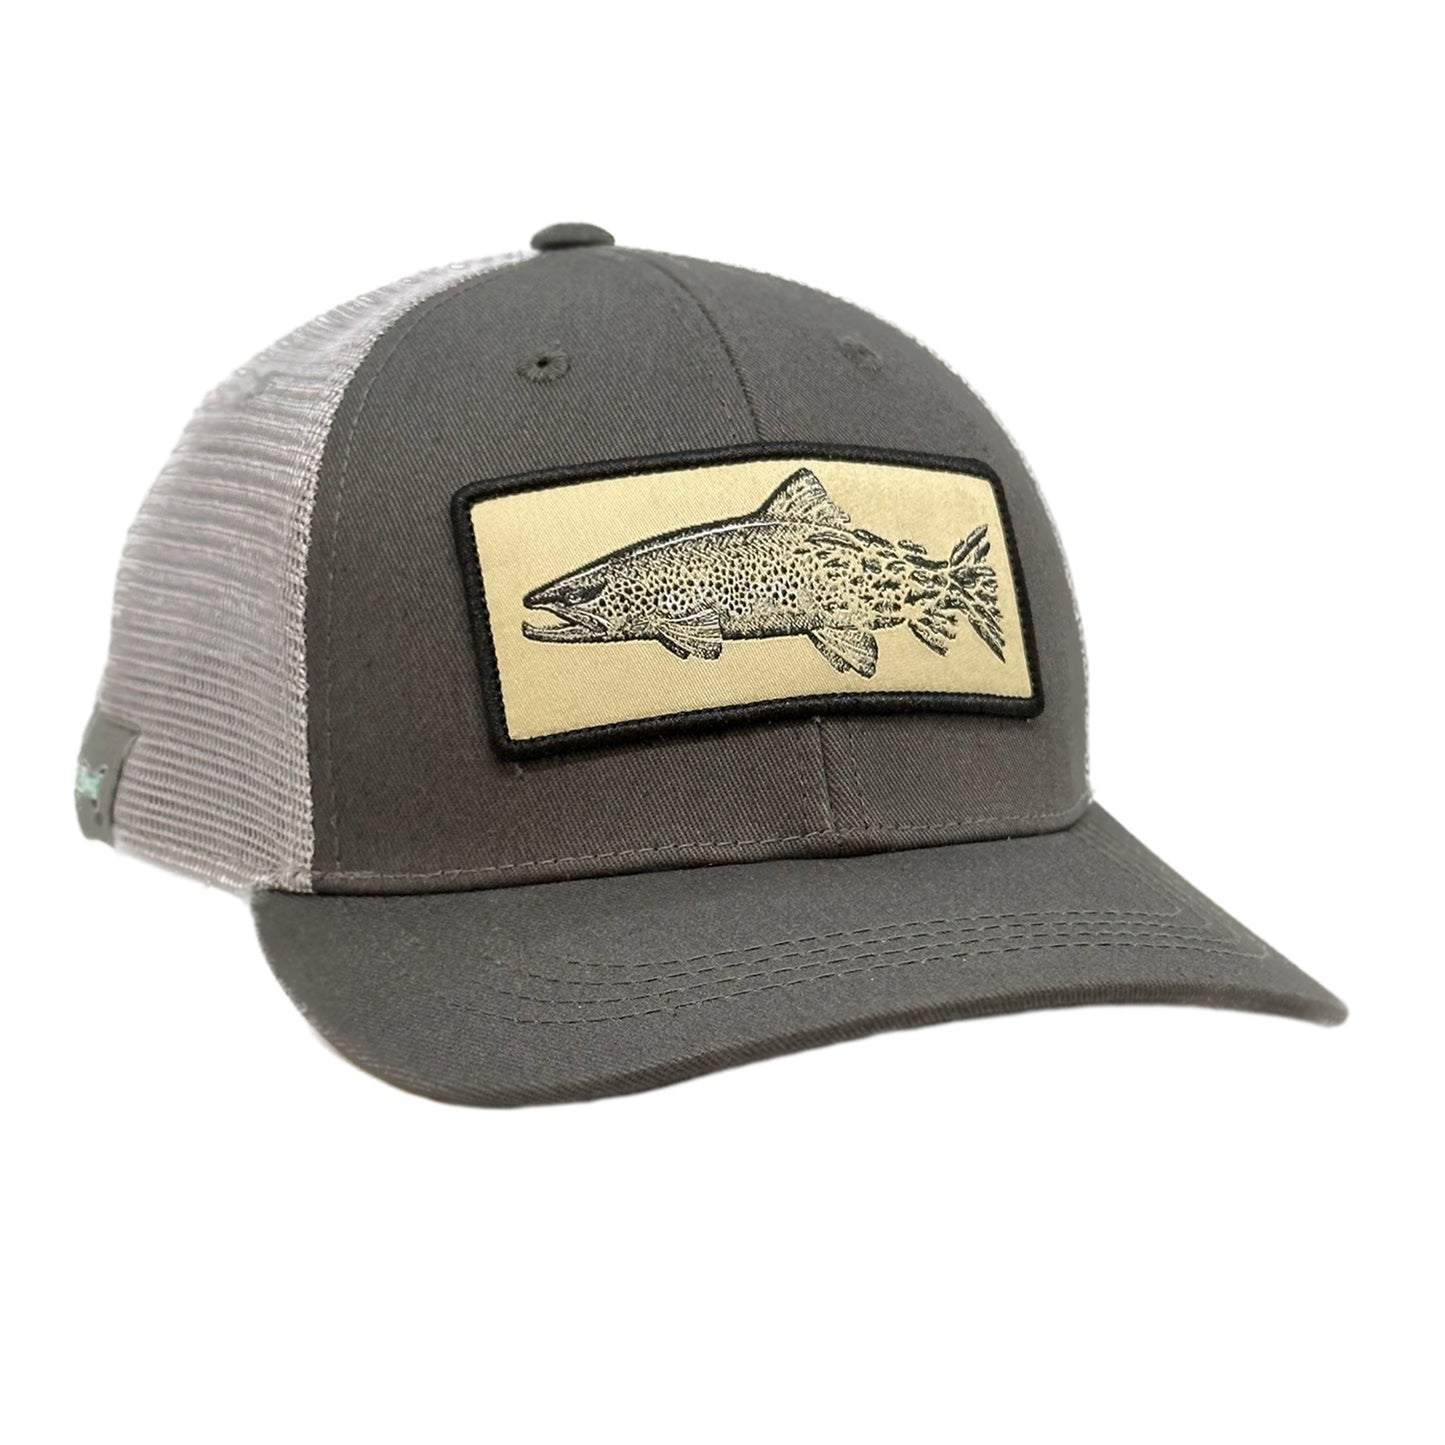 A gray front, light gray mesh back hat with a patch of a pen and ink brown trout head changing into flies going towards the tail of the fish